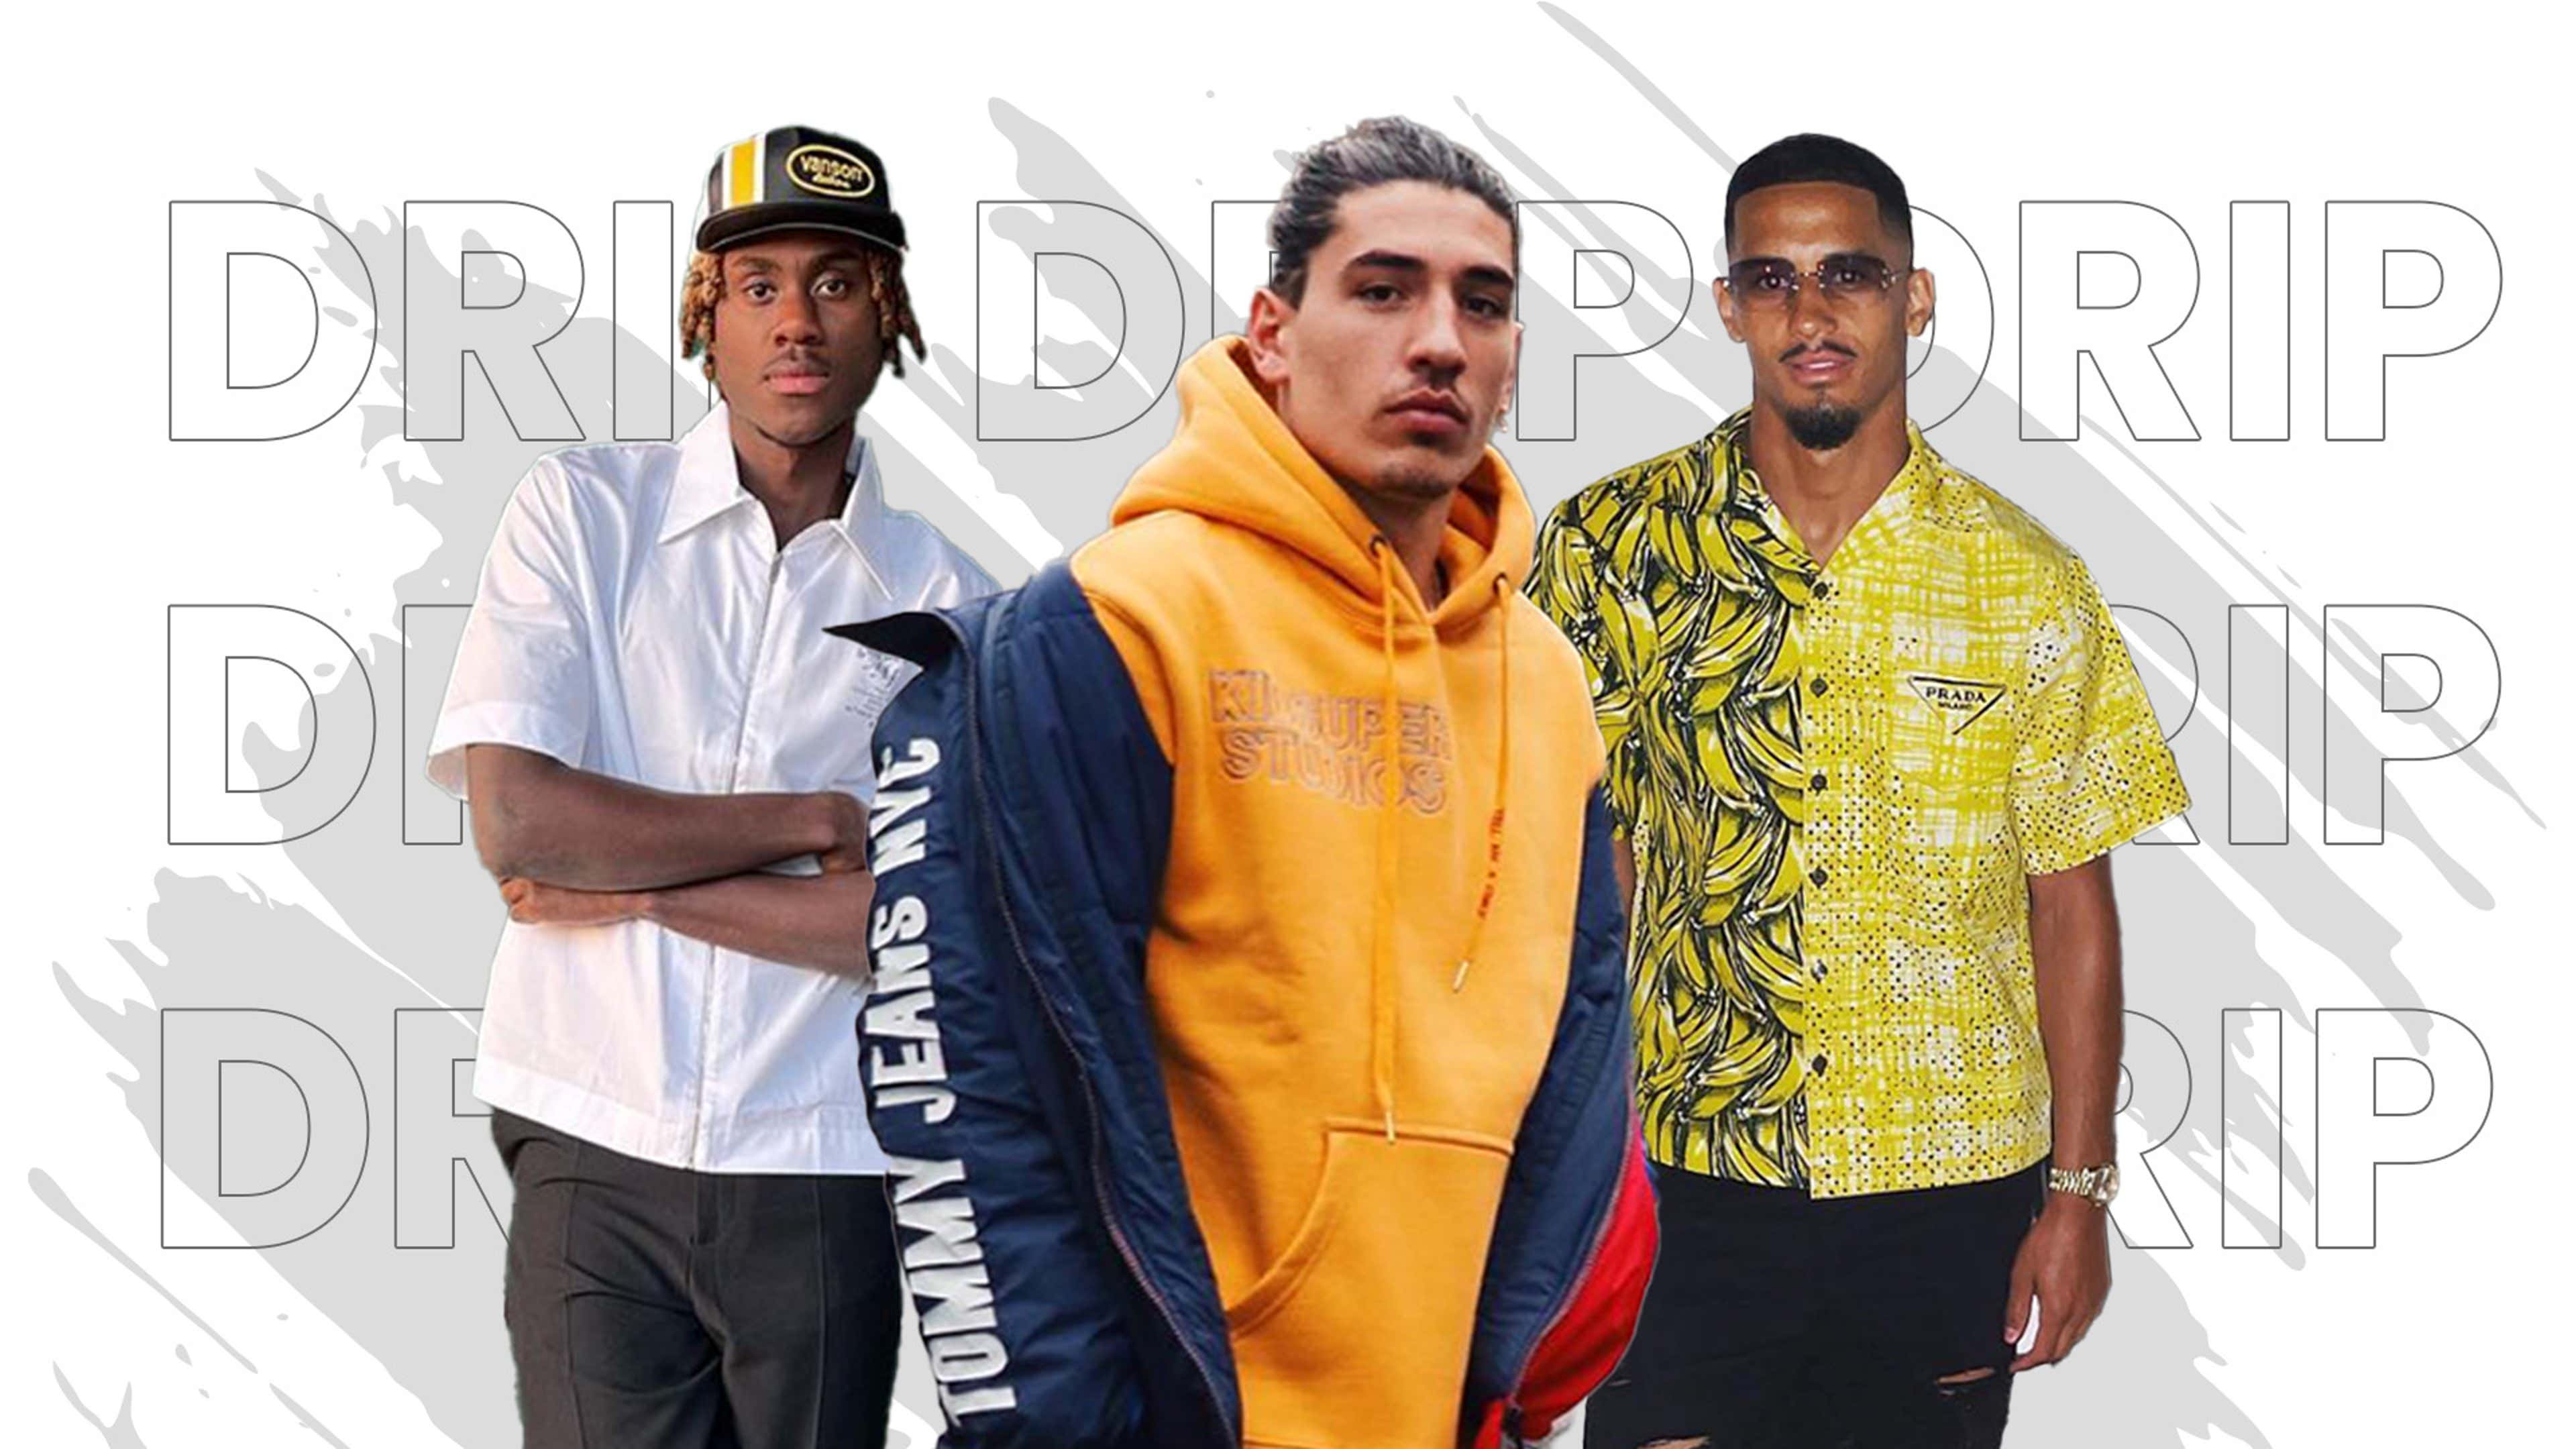 Arsenal to wear FA Cup final suits designed by Hector Bellerin as